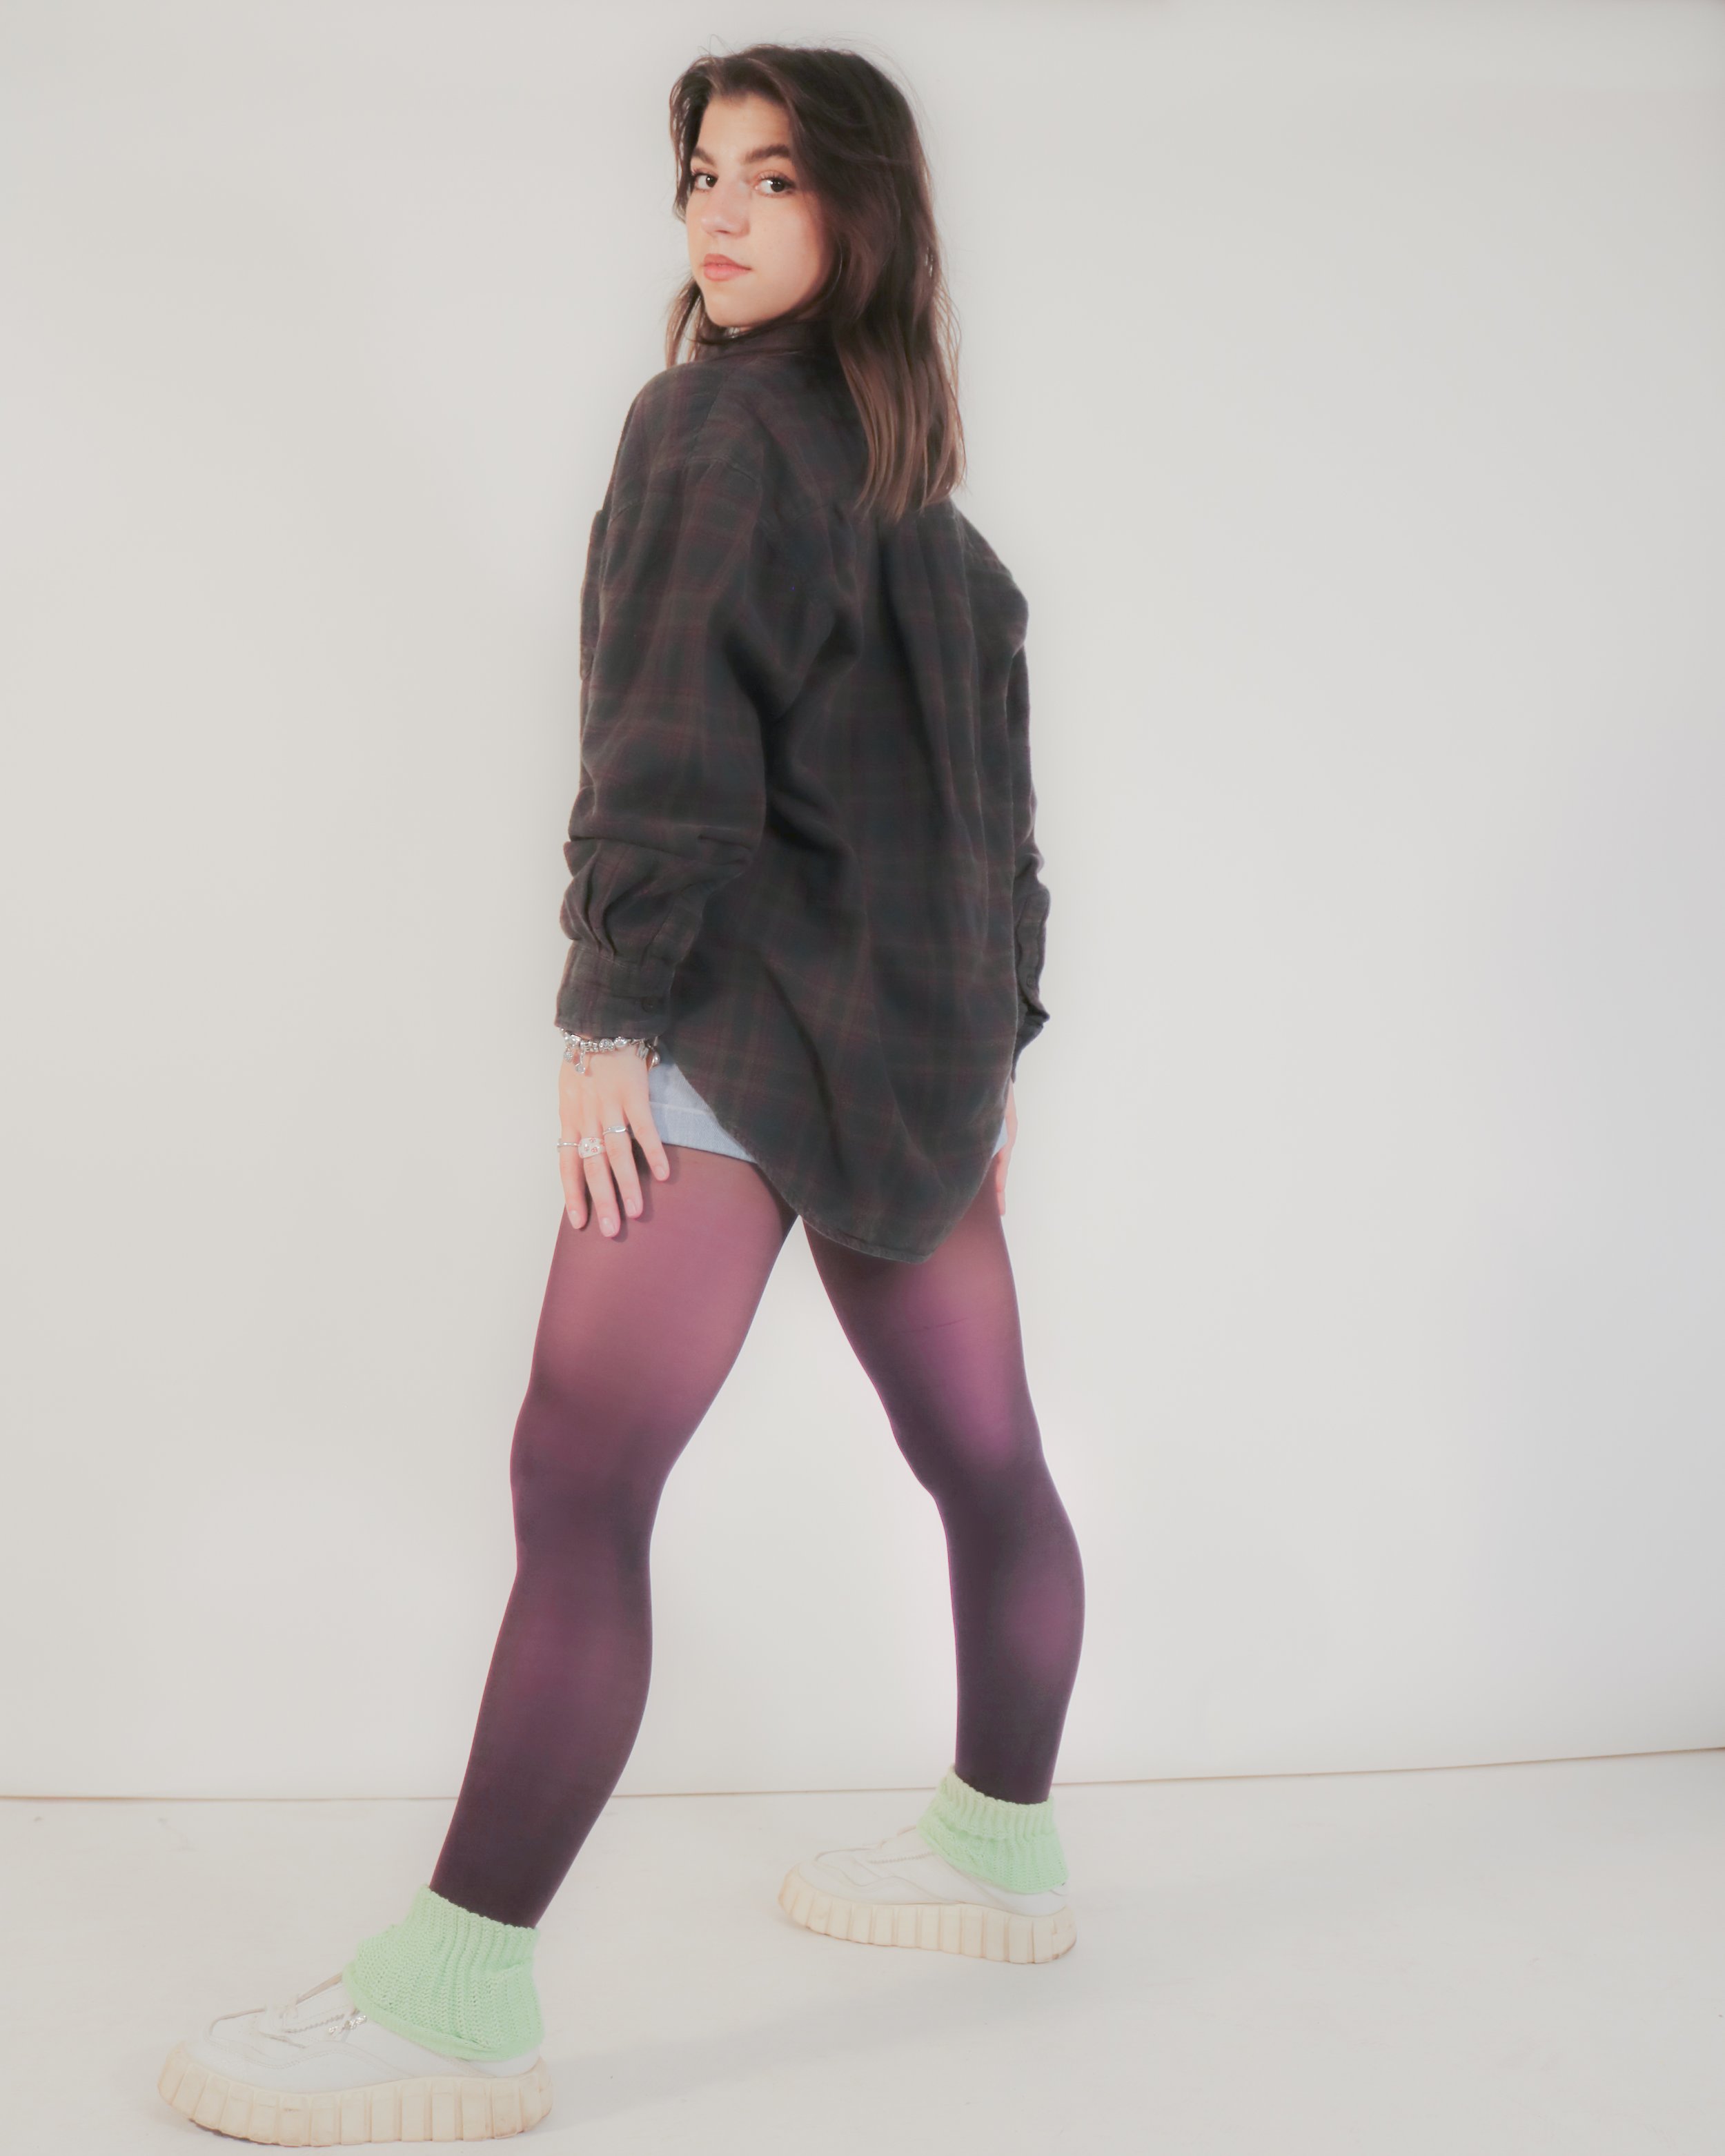 Tights and leggings - all the trends of 2022 • DRESS Magazine